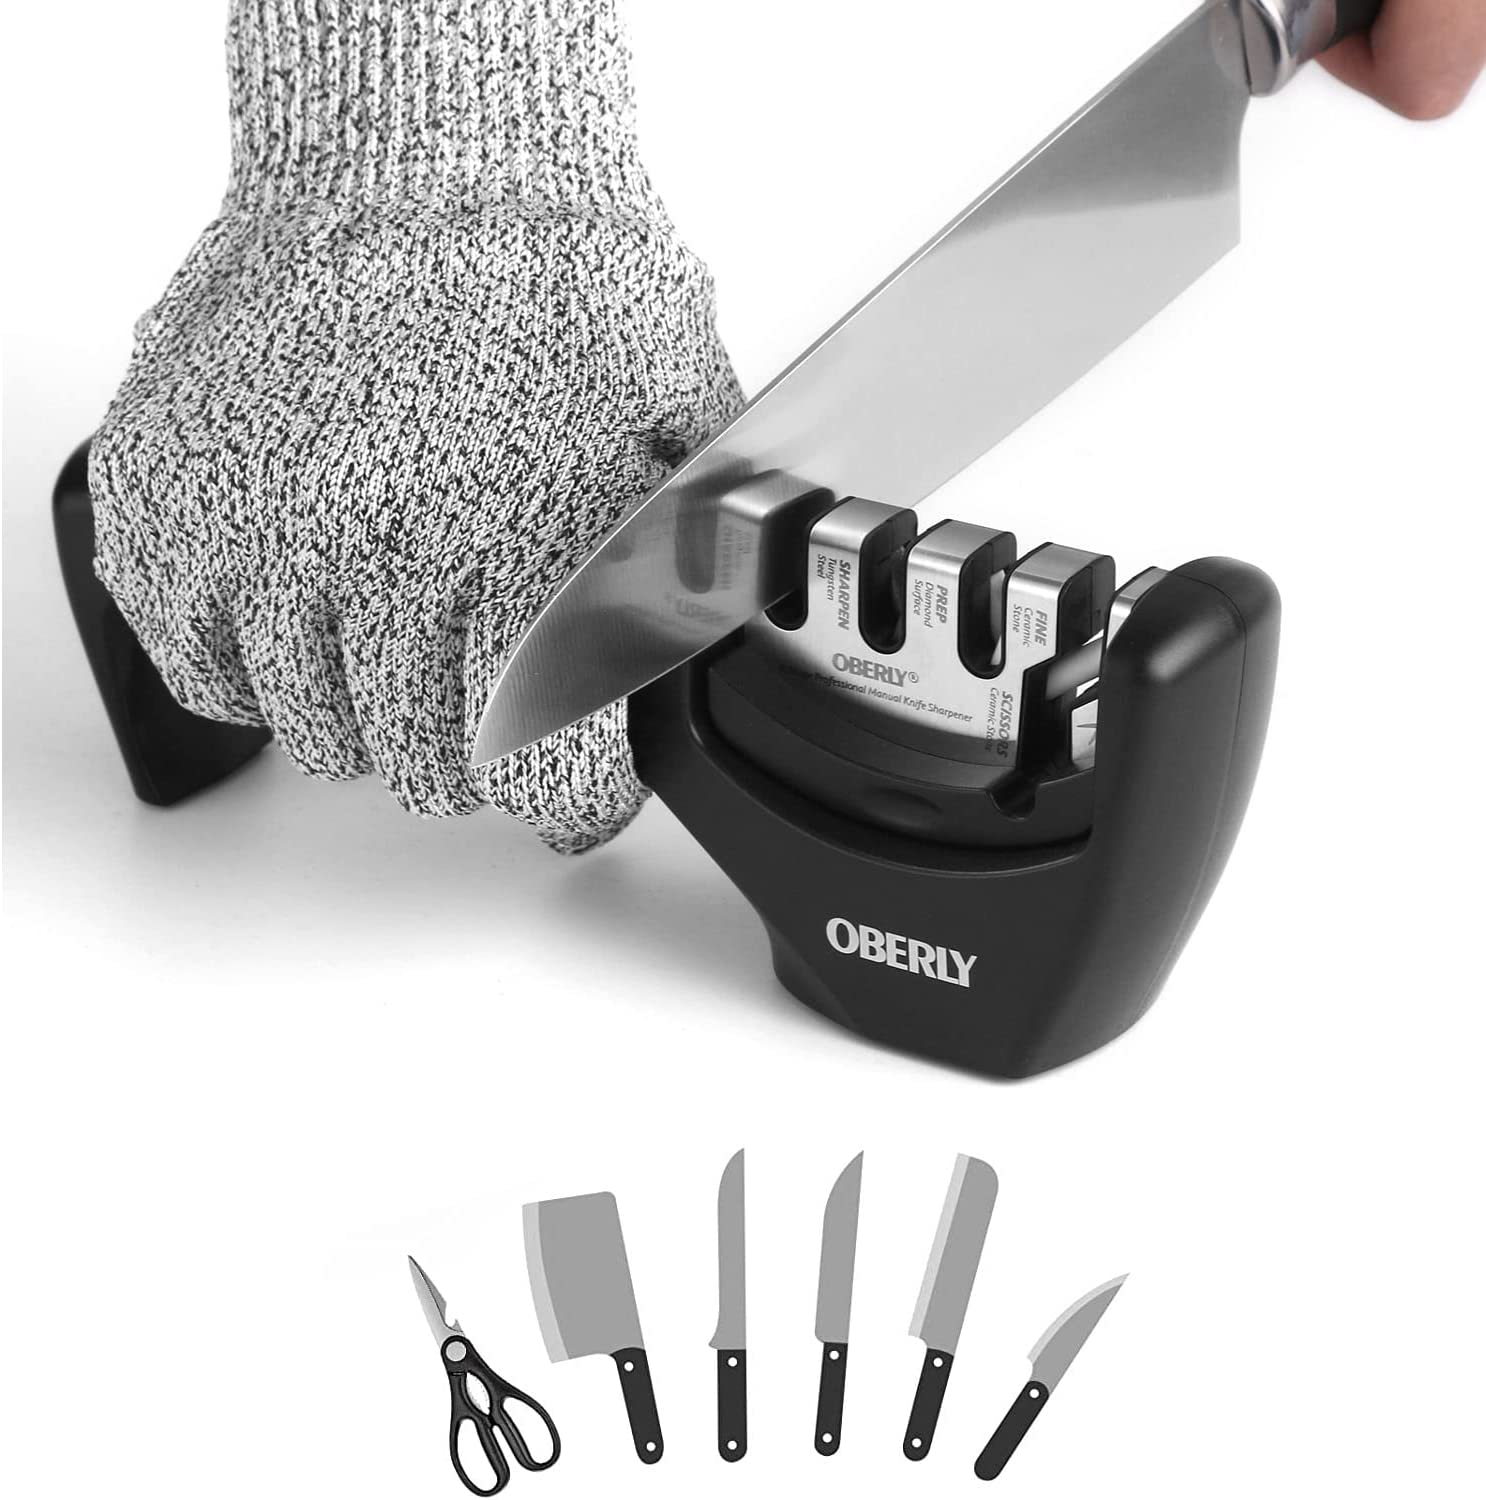 Kitchen Knife Sharpener Aid, OBERLY 4-Stage Knife and Scissors Sharpener with Diamond Abrasives Help Repair, Restore and Polish Dull Blades, Cut-Resistant Glove Included